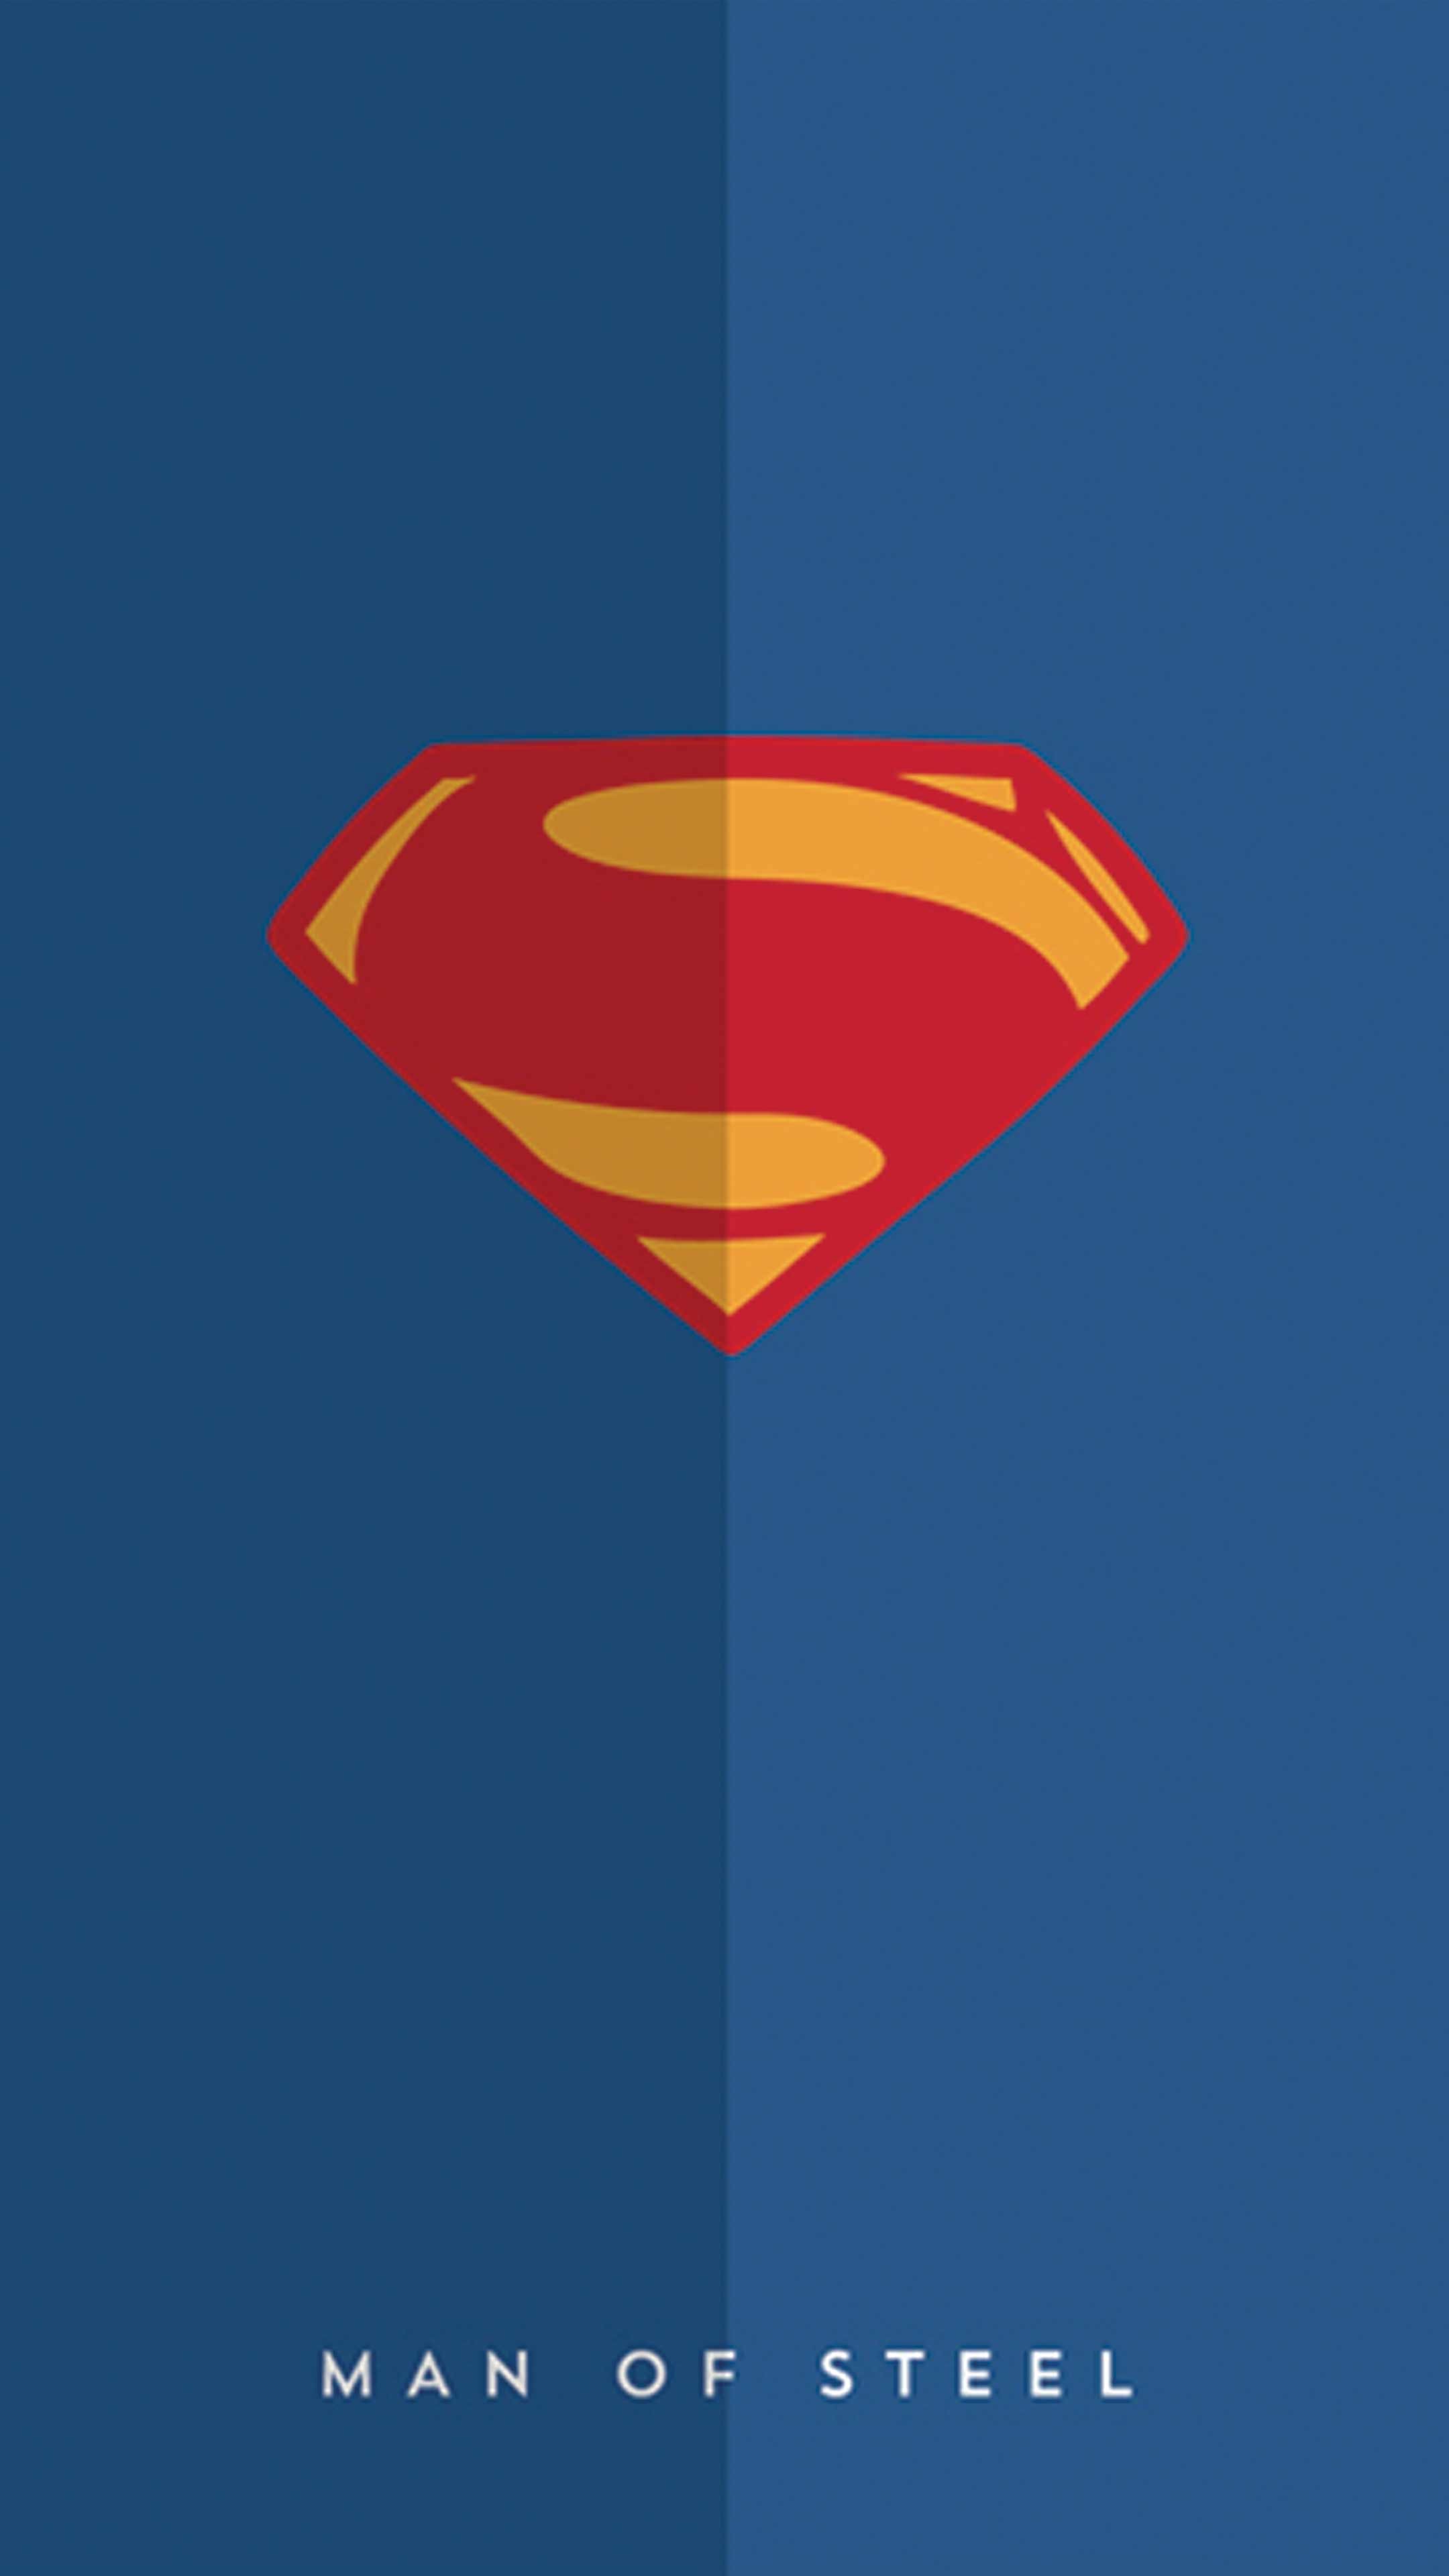 Superman wallpapers for iPhone  Superman wallpaper Superman hd wallpaper  Superman art